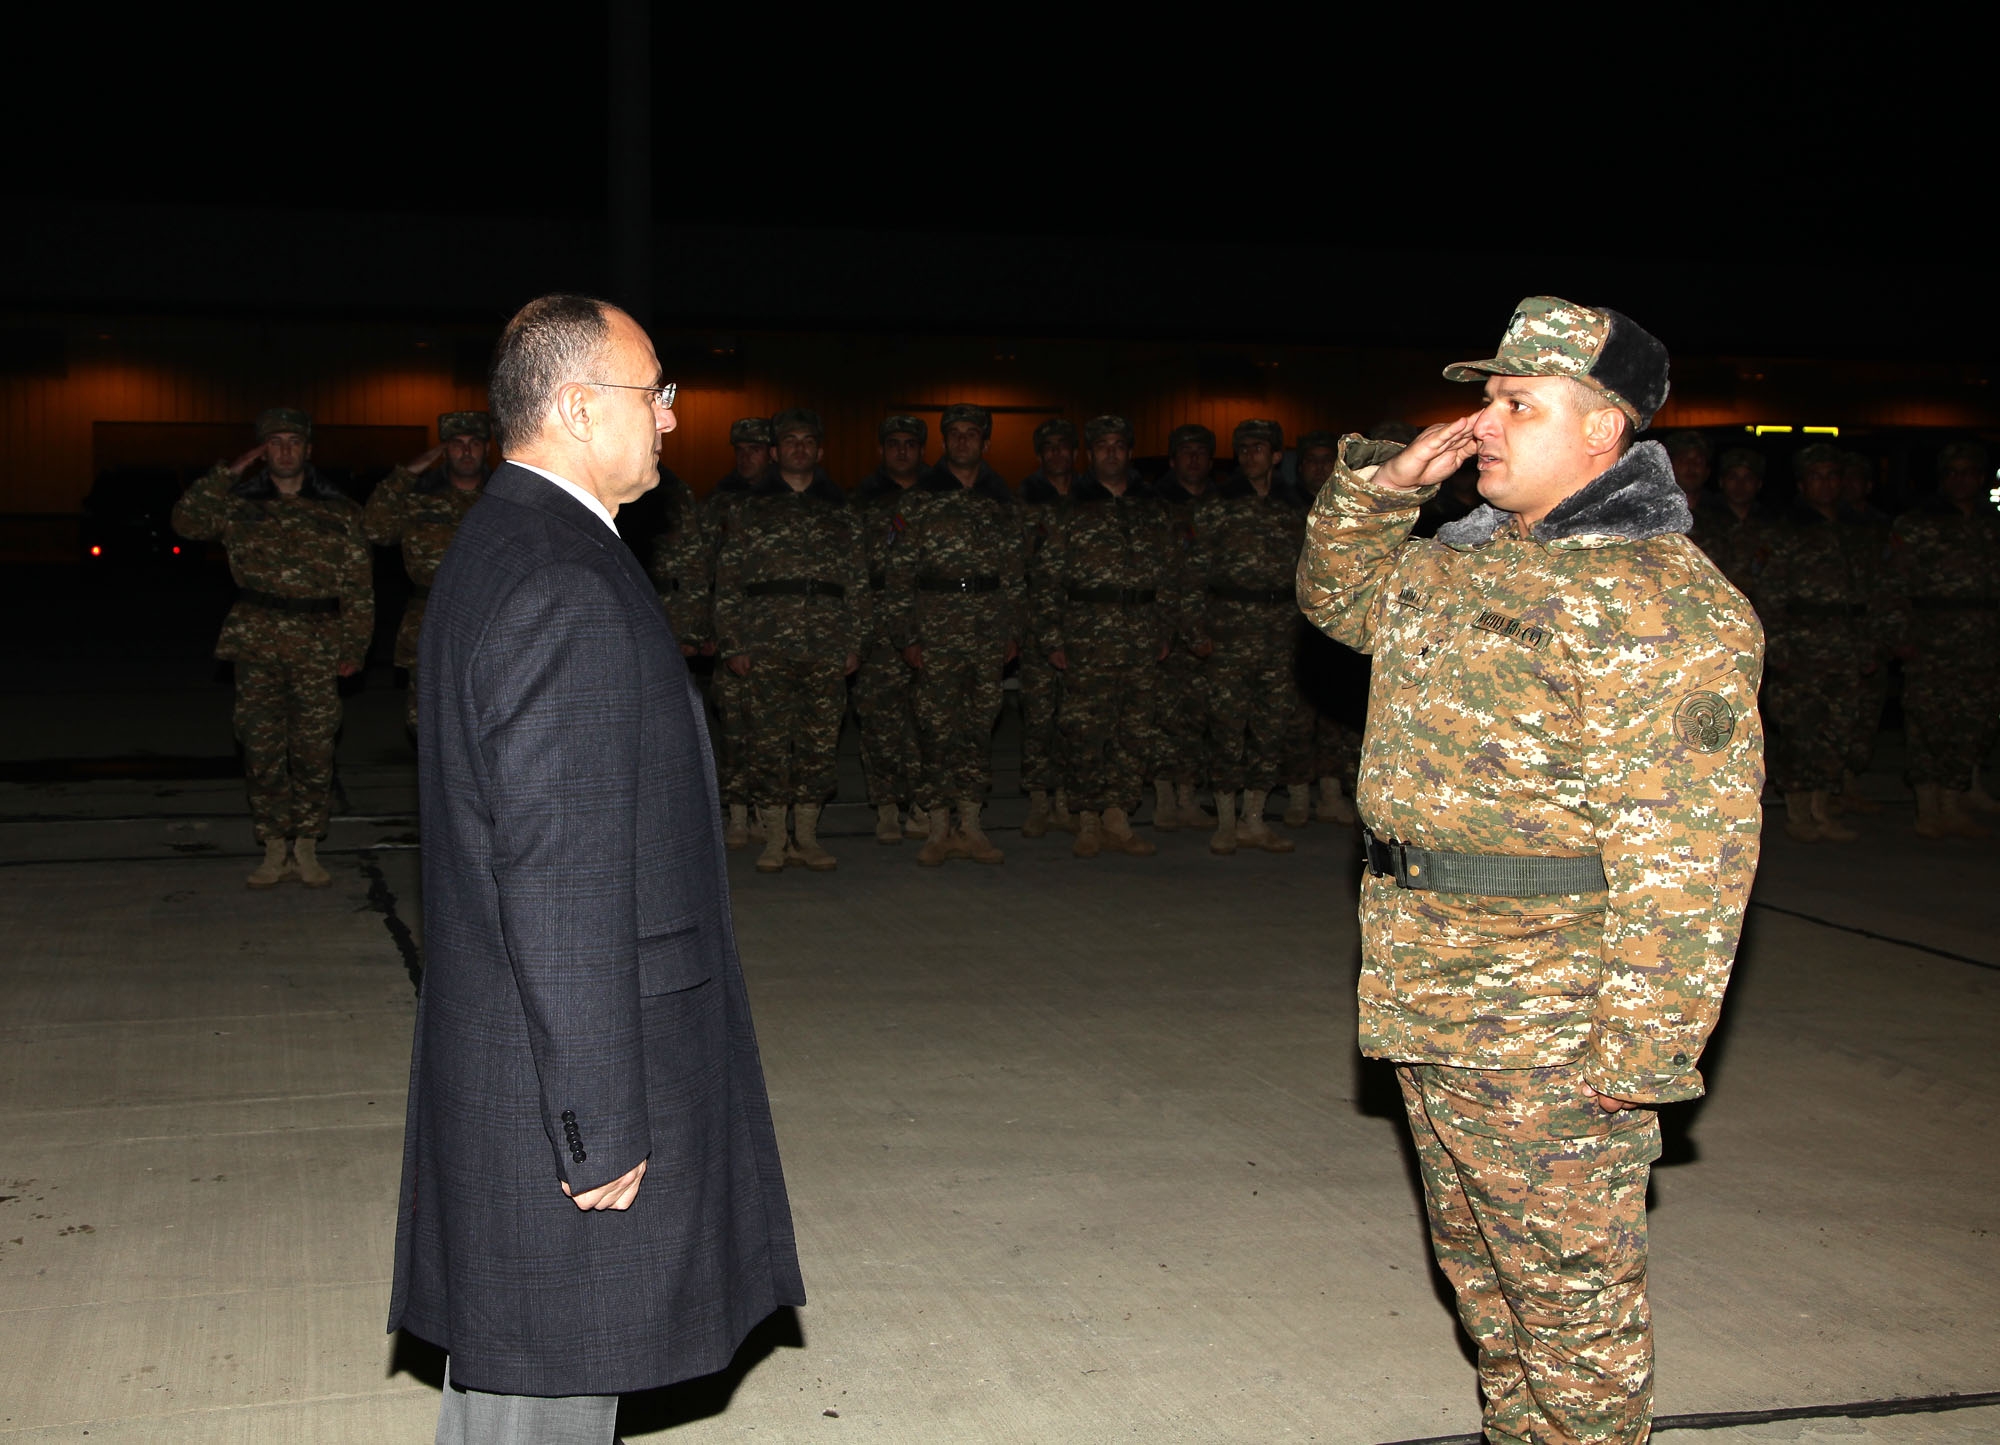 Serving in Lebanon, peacemakers contribute to Armenia's security: Defense Minister